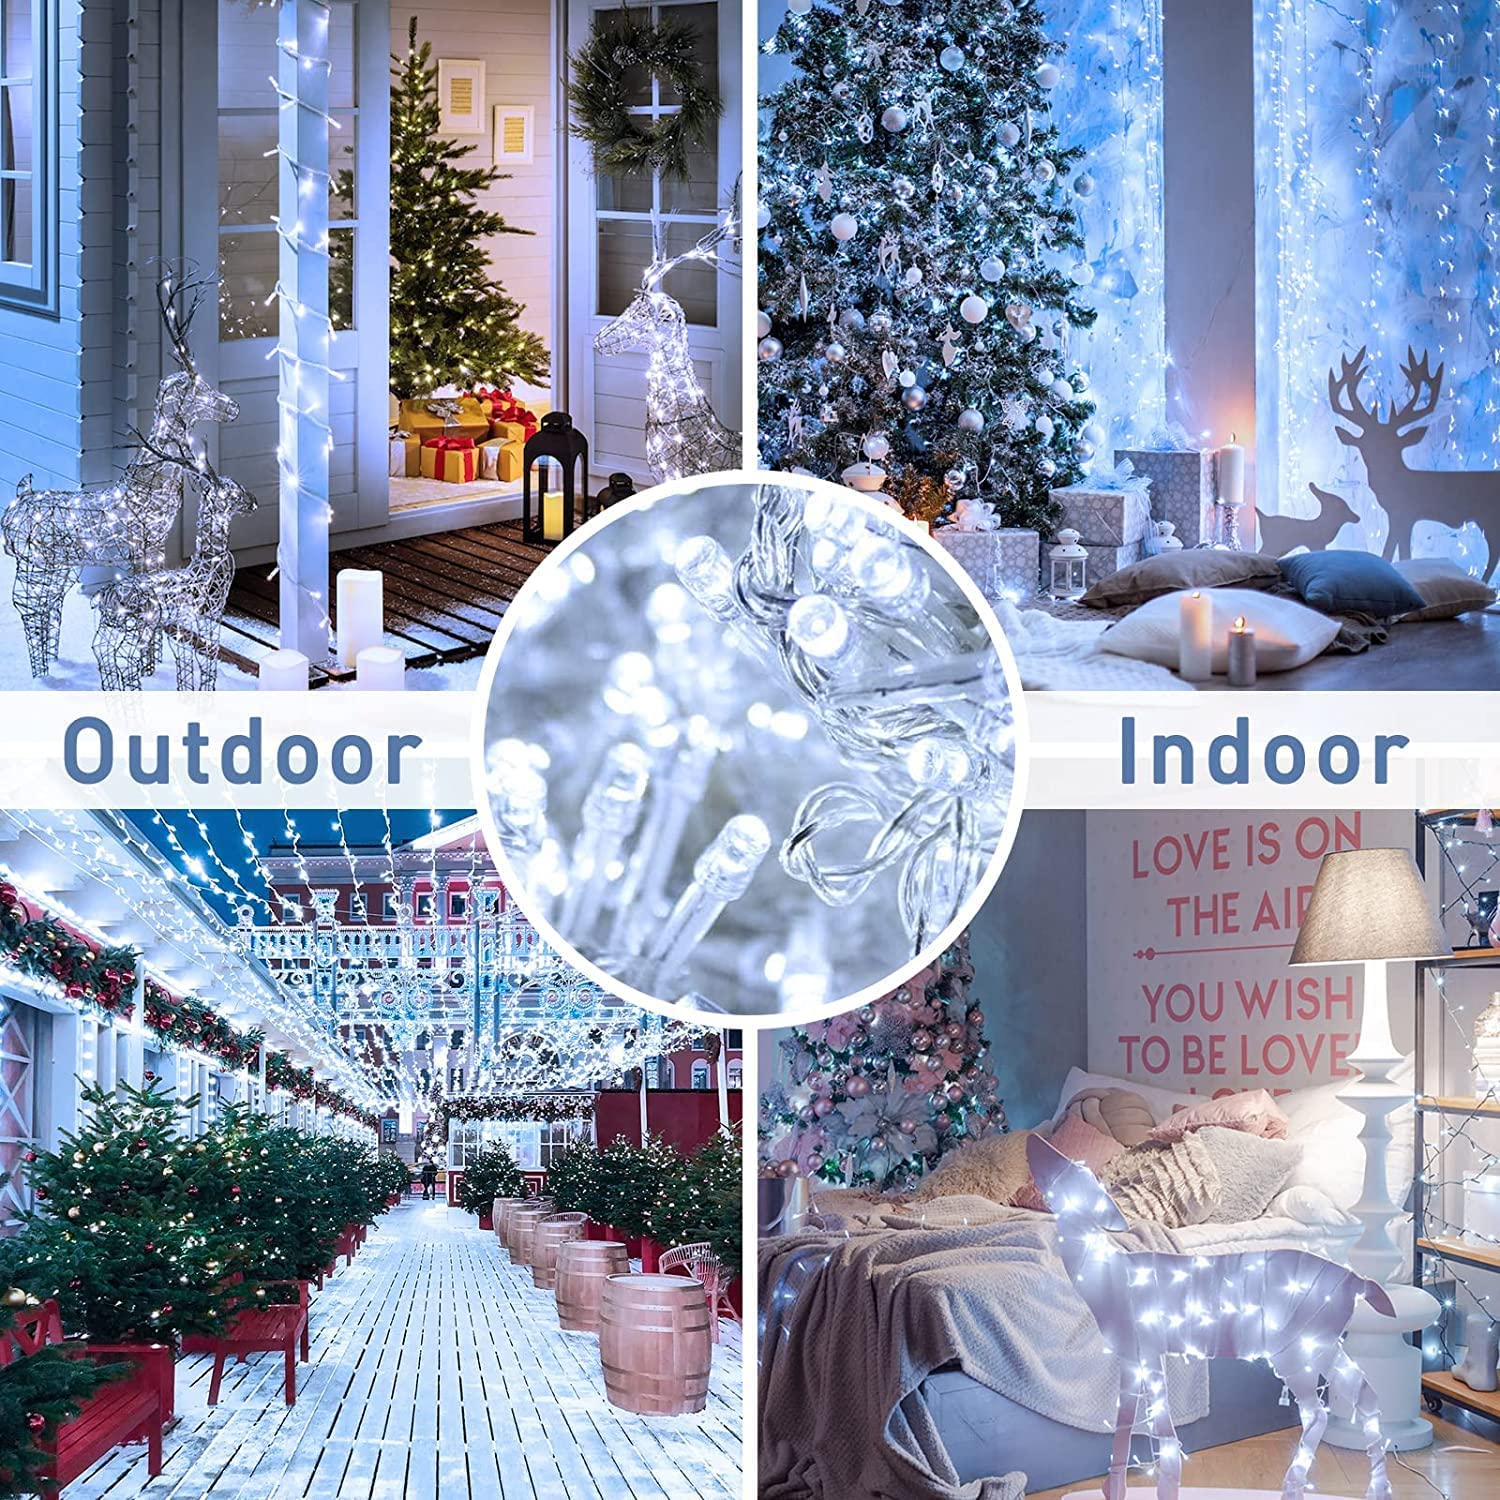 Christmas Outdoor String Lights, GooingTop 42.6 Ft 130 LED Lights Battery Operated for Garden Patio, Holiday Wedding Christmas Outdoor Indoor Decor (Cool White) - image 3 of 9